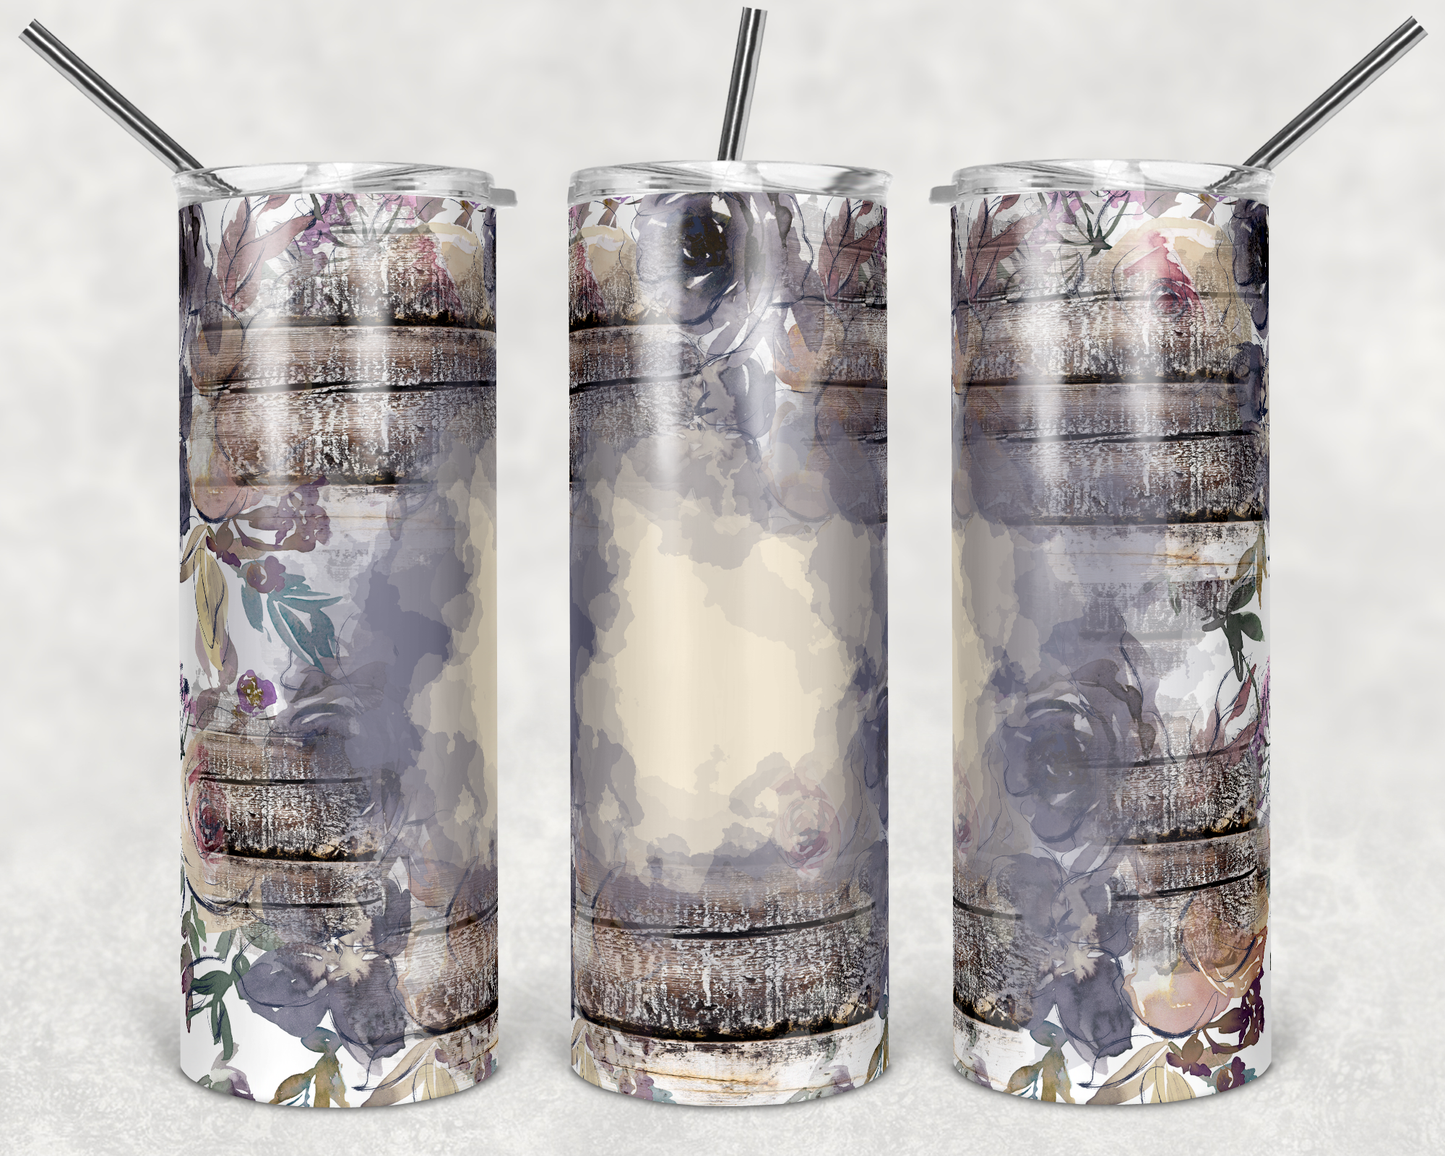 Floral and Wood Tumbler